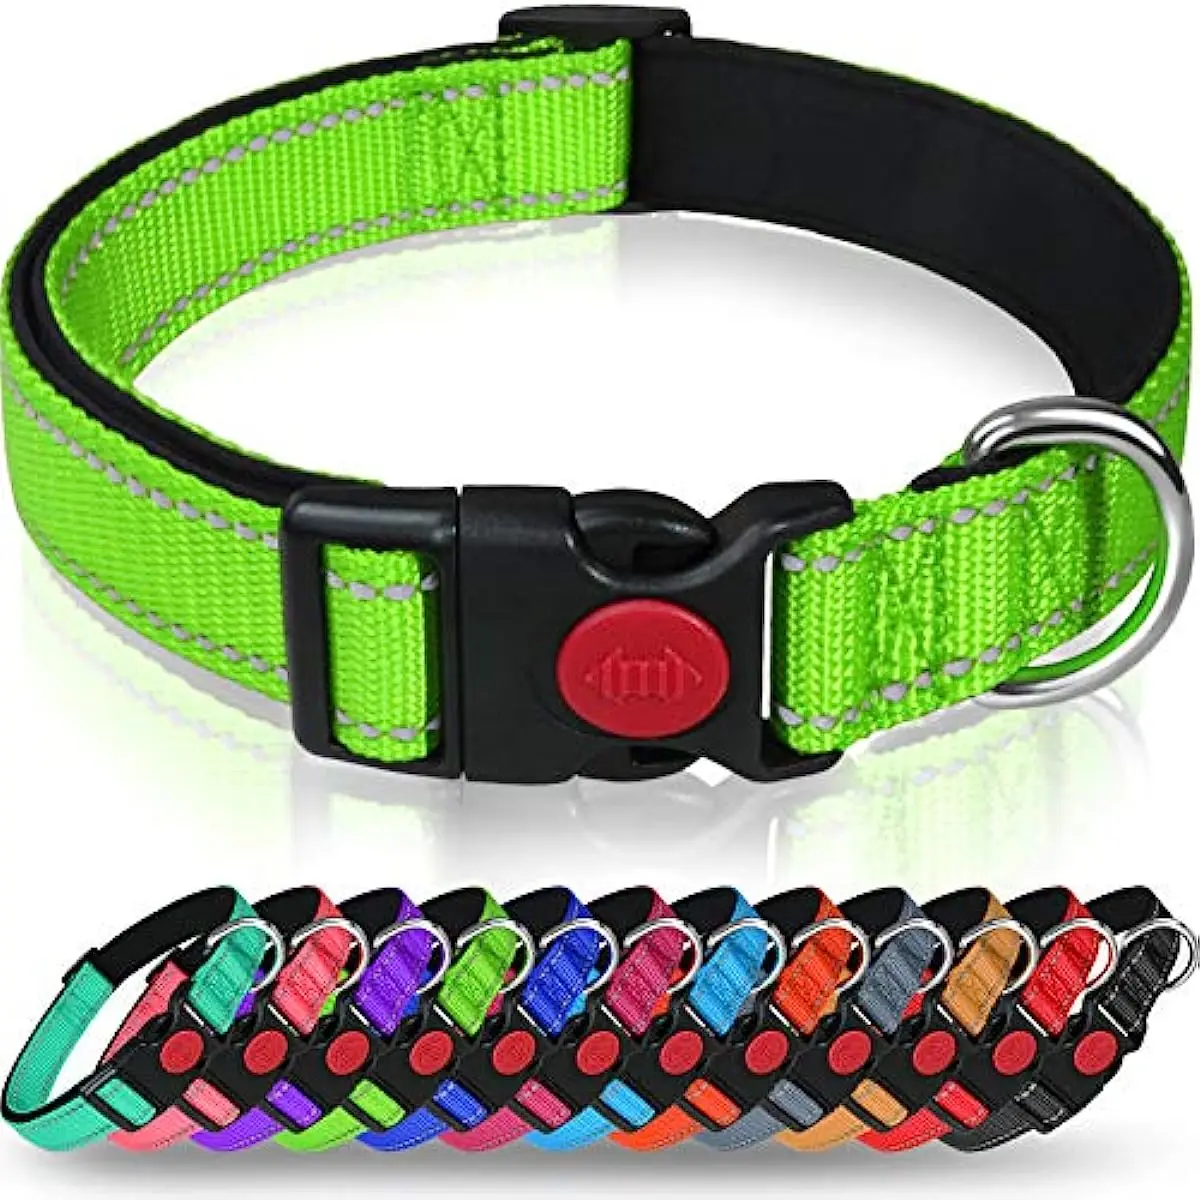 

Reflective Dog Collar with Safety Locking Buckle Adjustable Nylon Pet Collars for Puppy Dogs Dog Collars OEM Custom LOGO